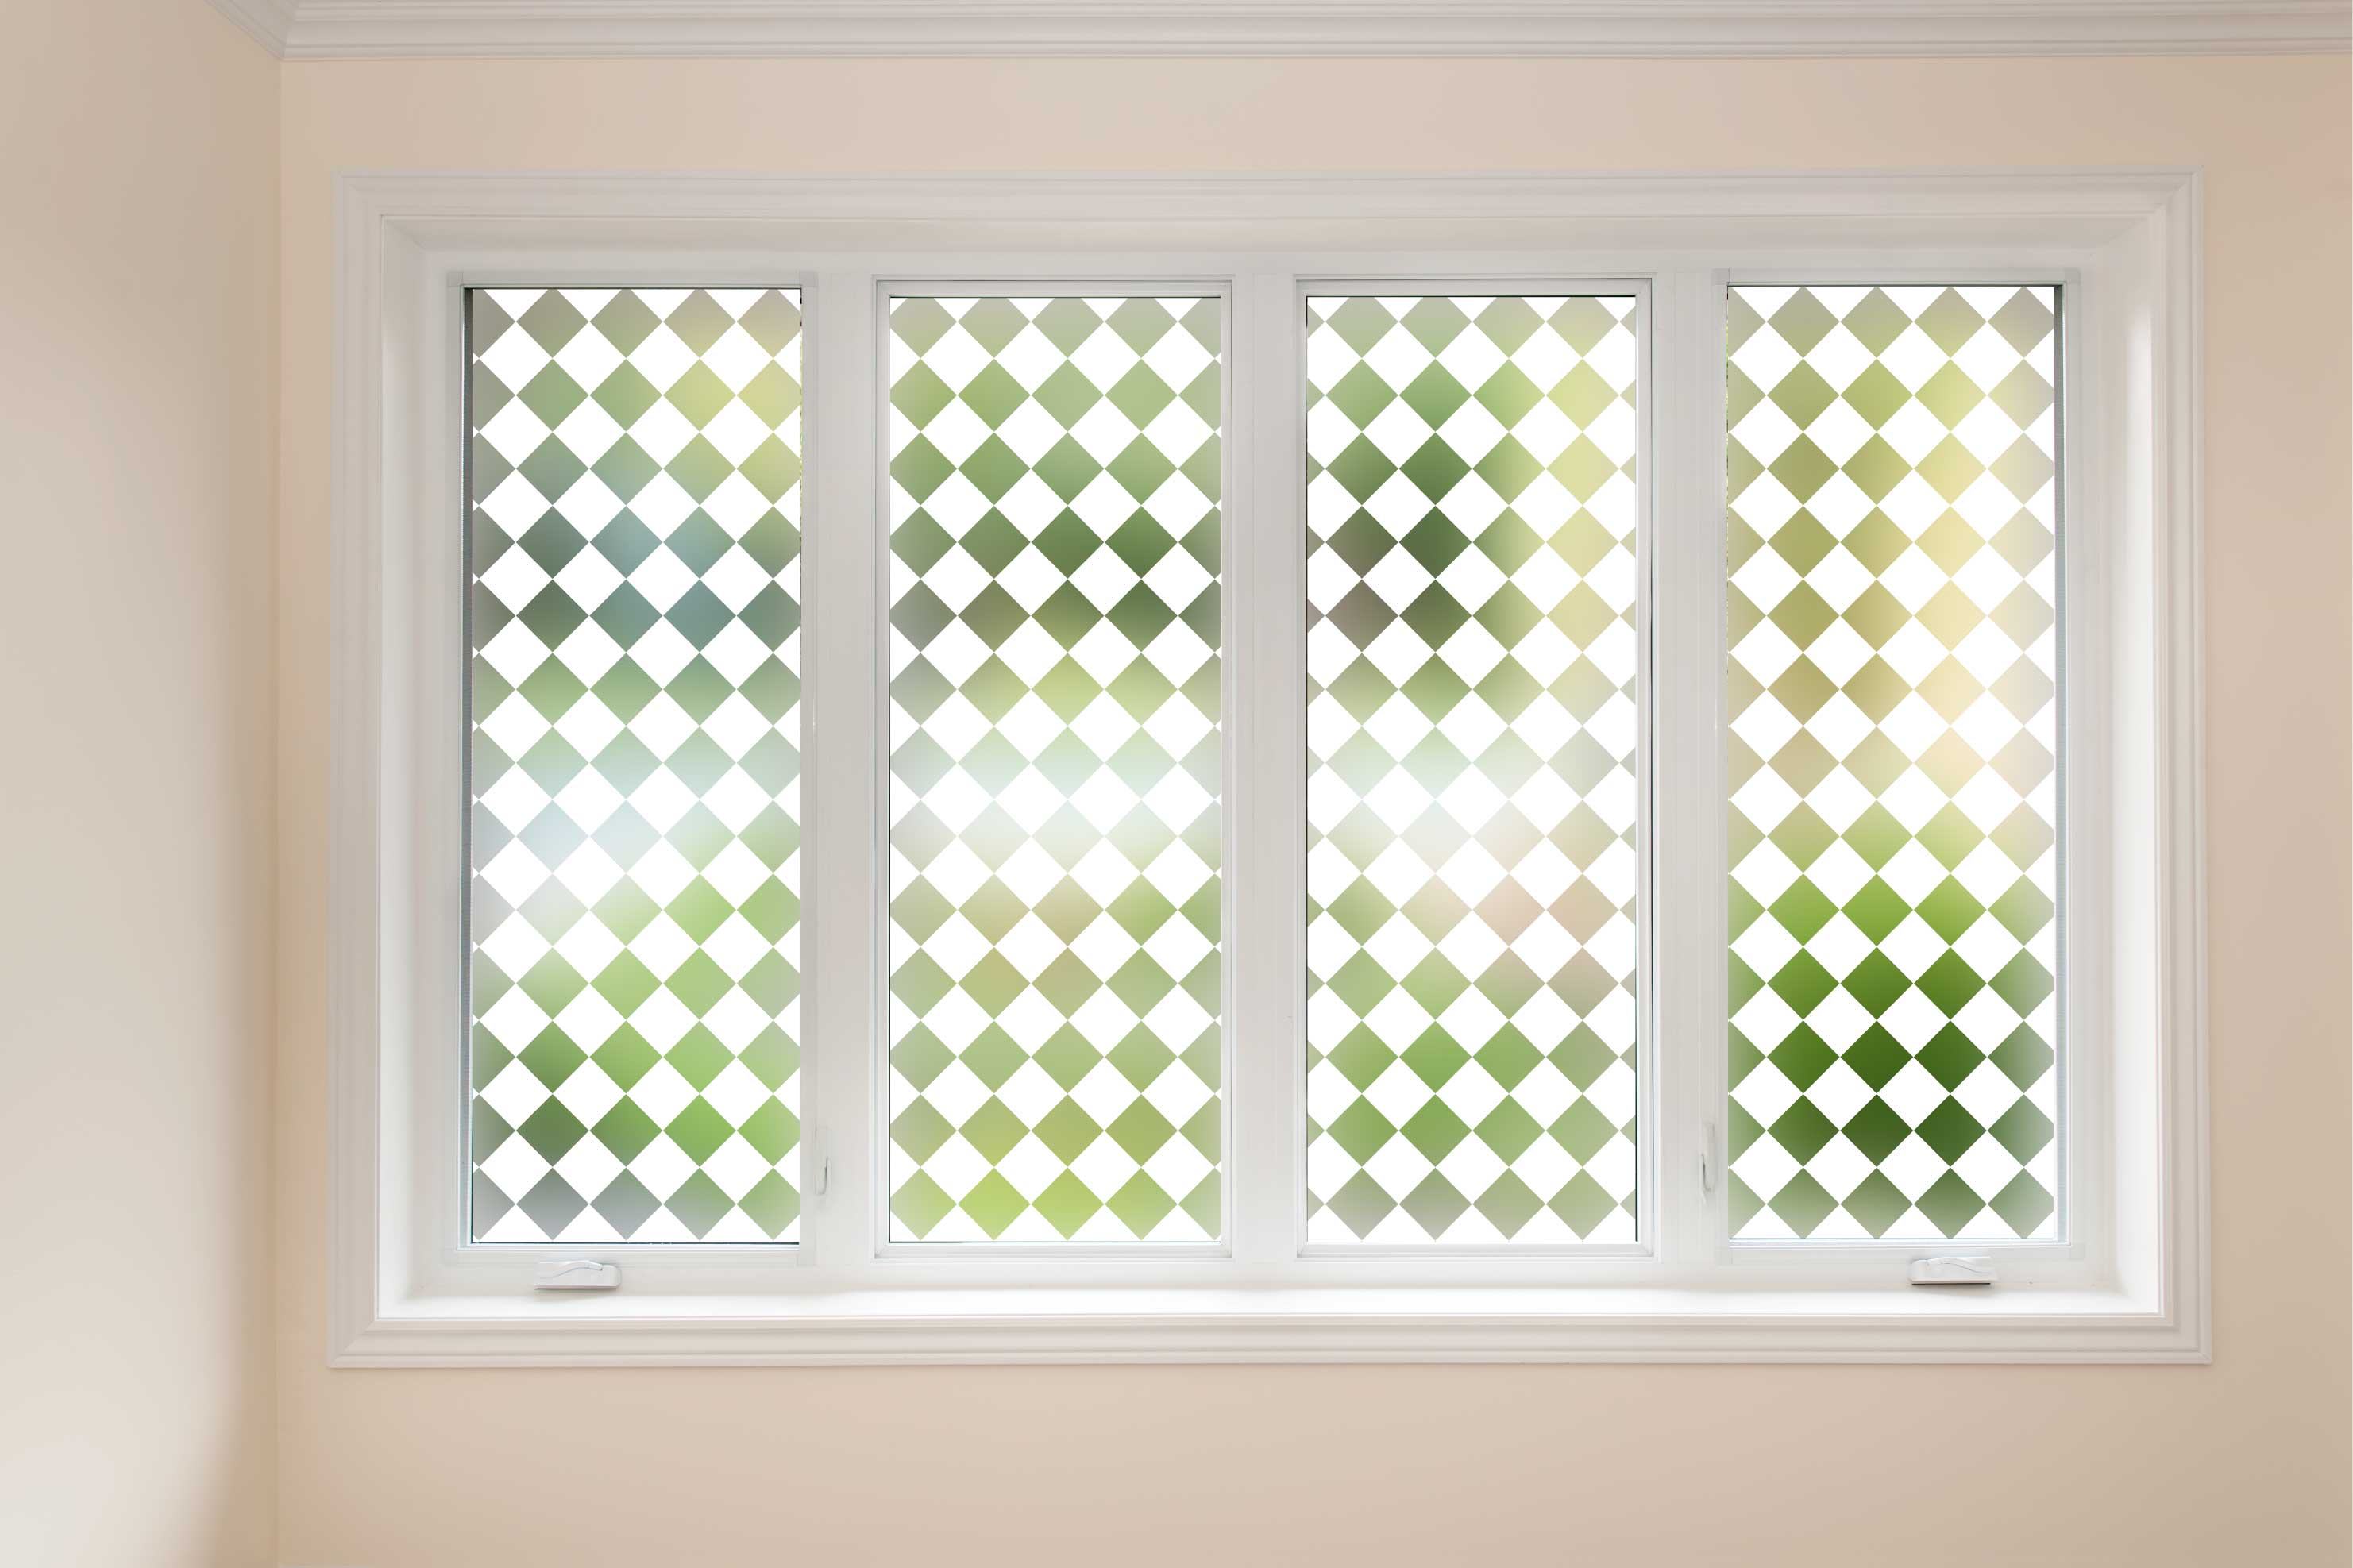 Diamond Chequerboard Squares Decorative  Frosted Window Privacy Film